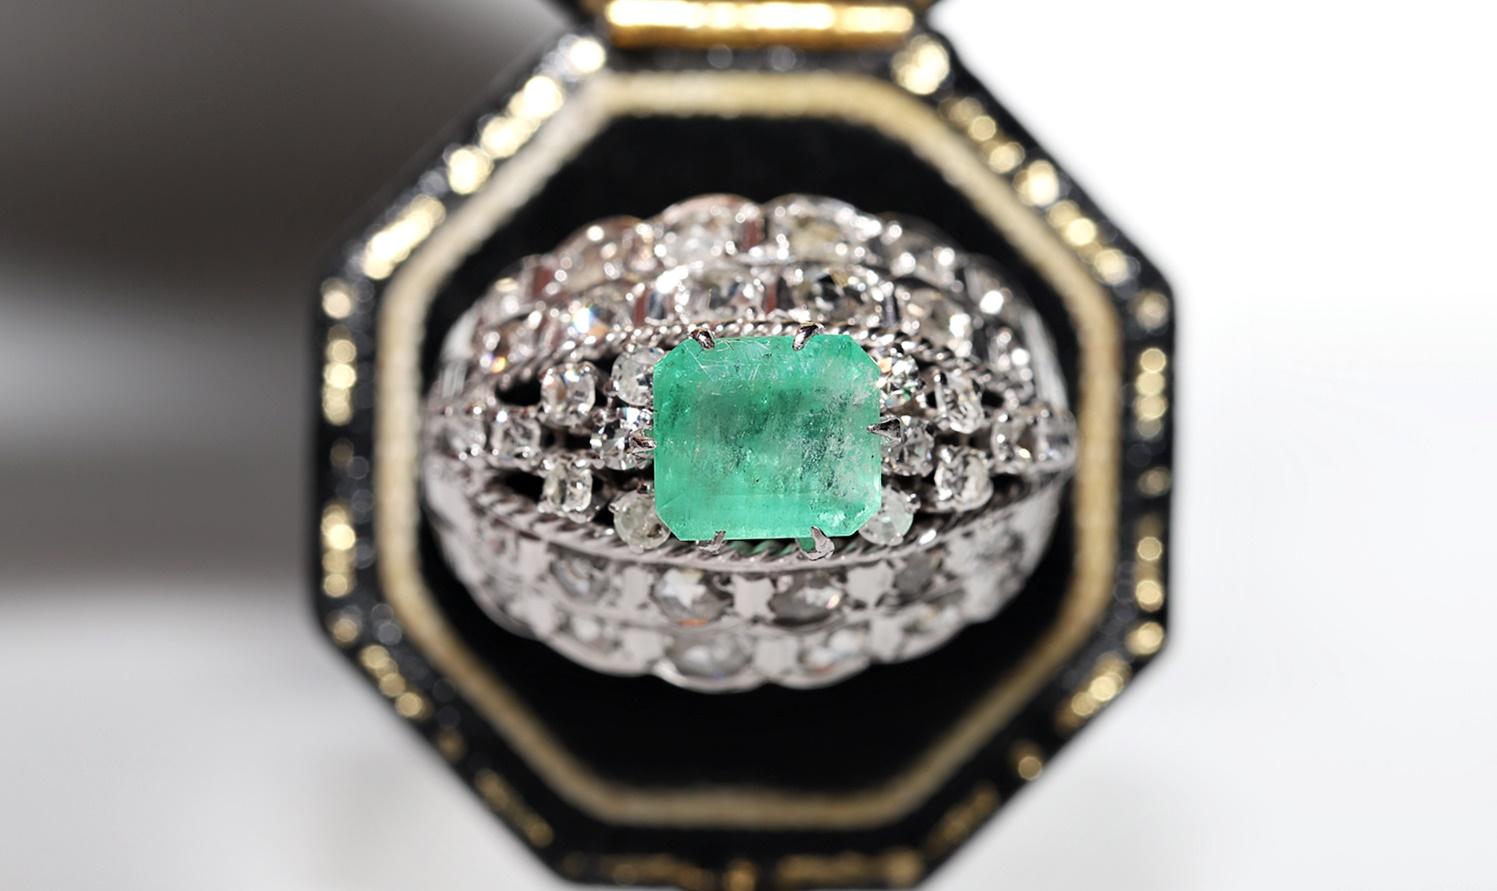 In very good condition.
Total weight is 7.4 grams.
Totally is brilliant cut diamond 0.40 ct.
Totally is rose cut diamond 0.60 ct .
The diamond is has H-I-J-K color and s1-s2-s3.
Totally is emerald about 2 ct.
Ring size is US 6.5 (We offer free